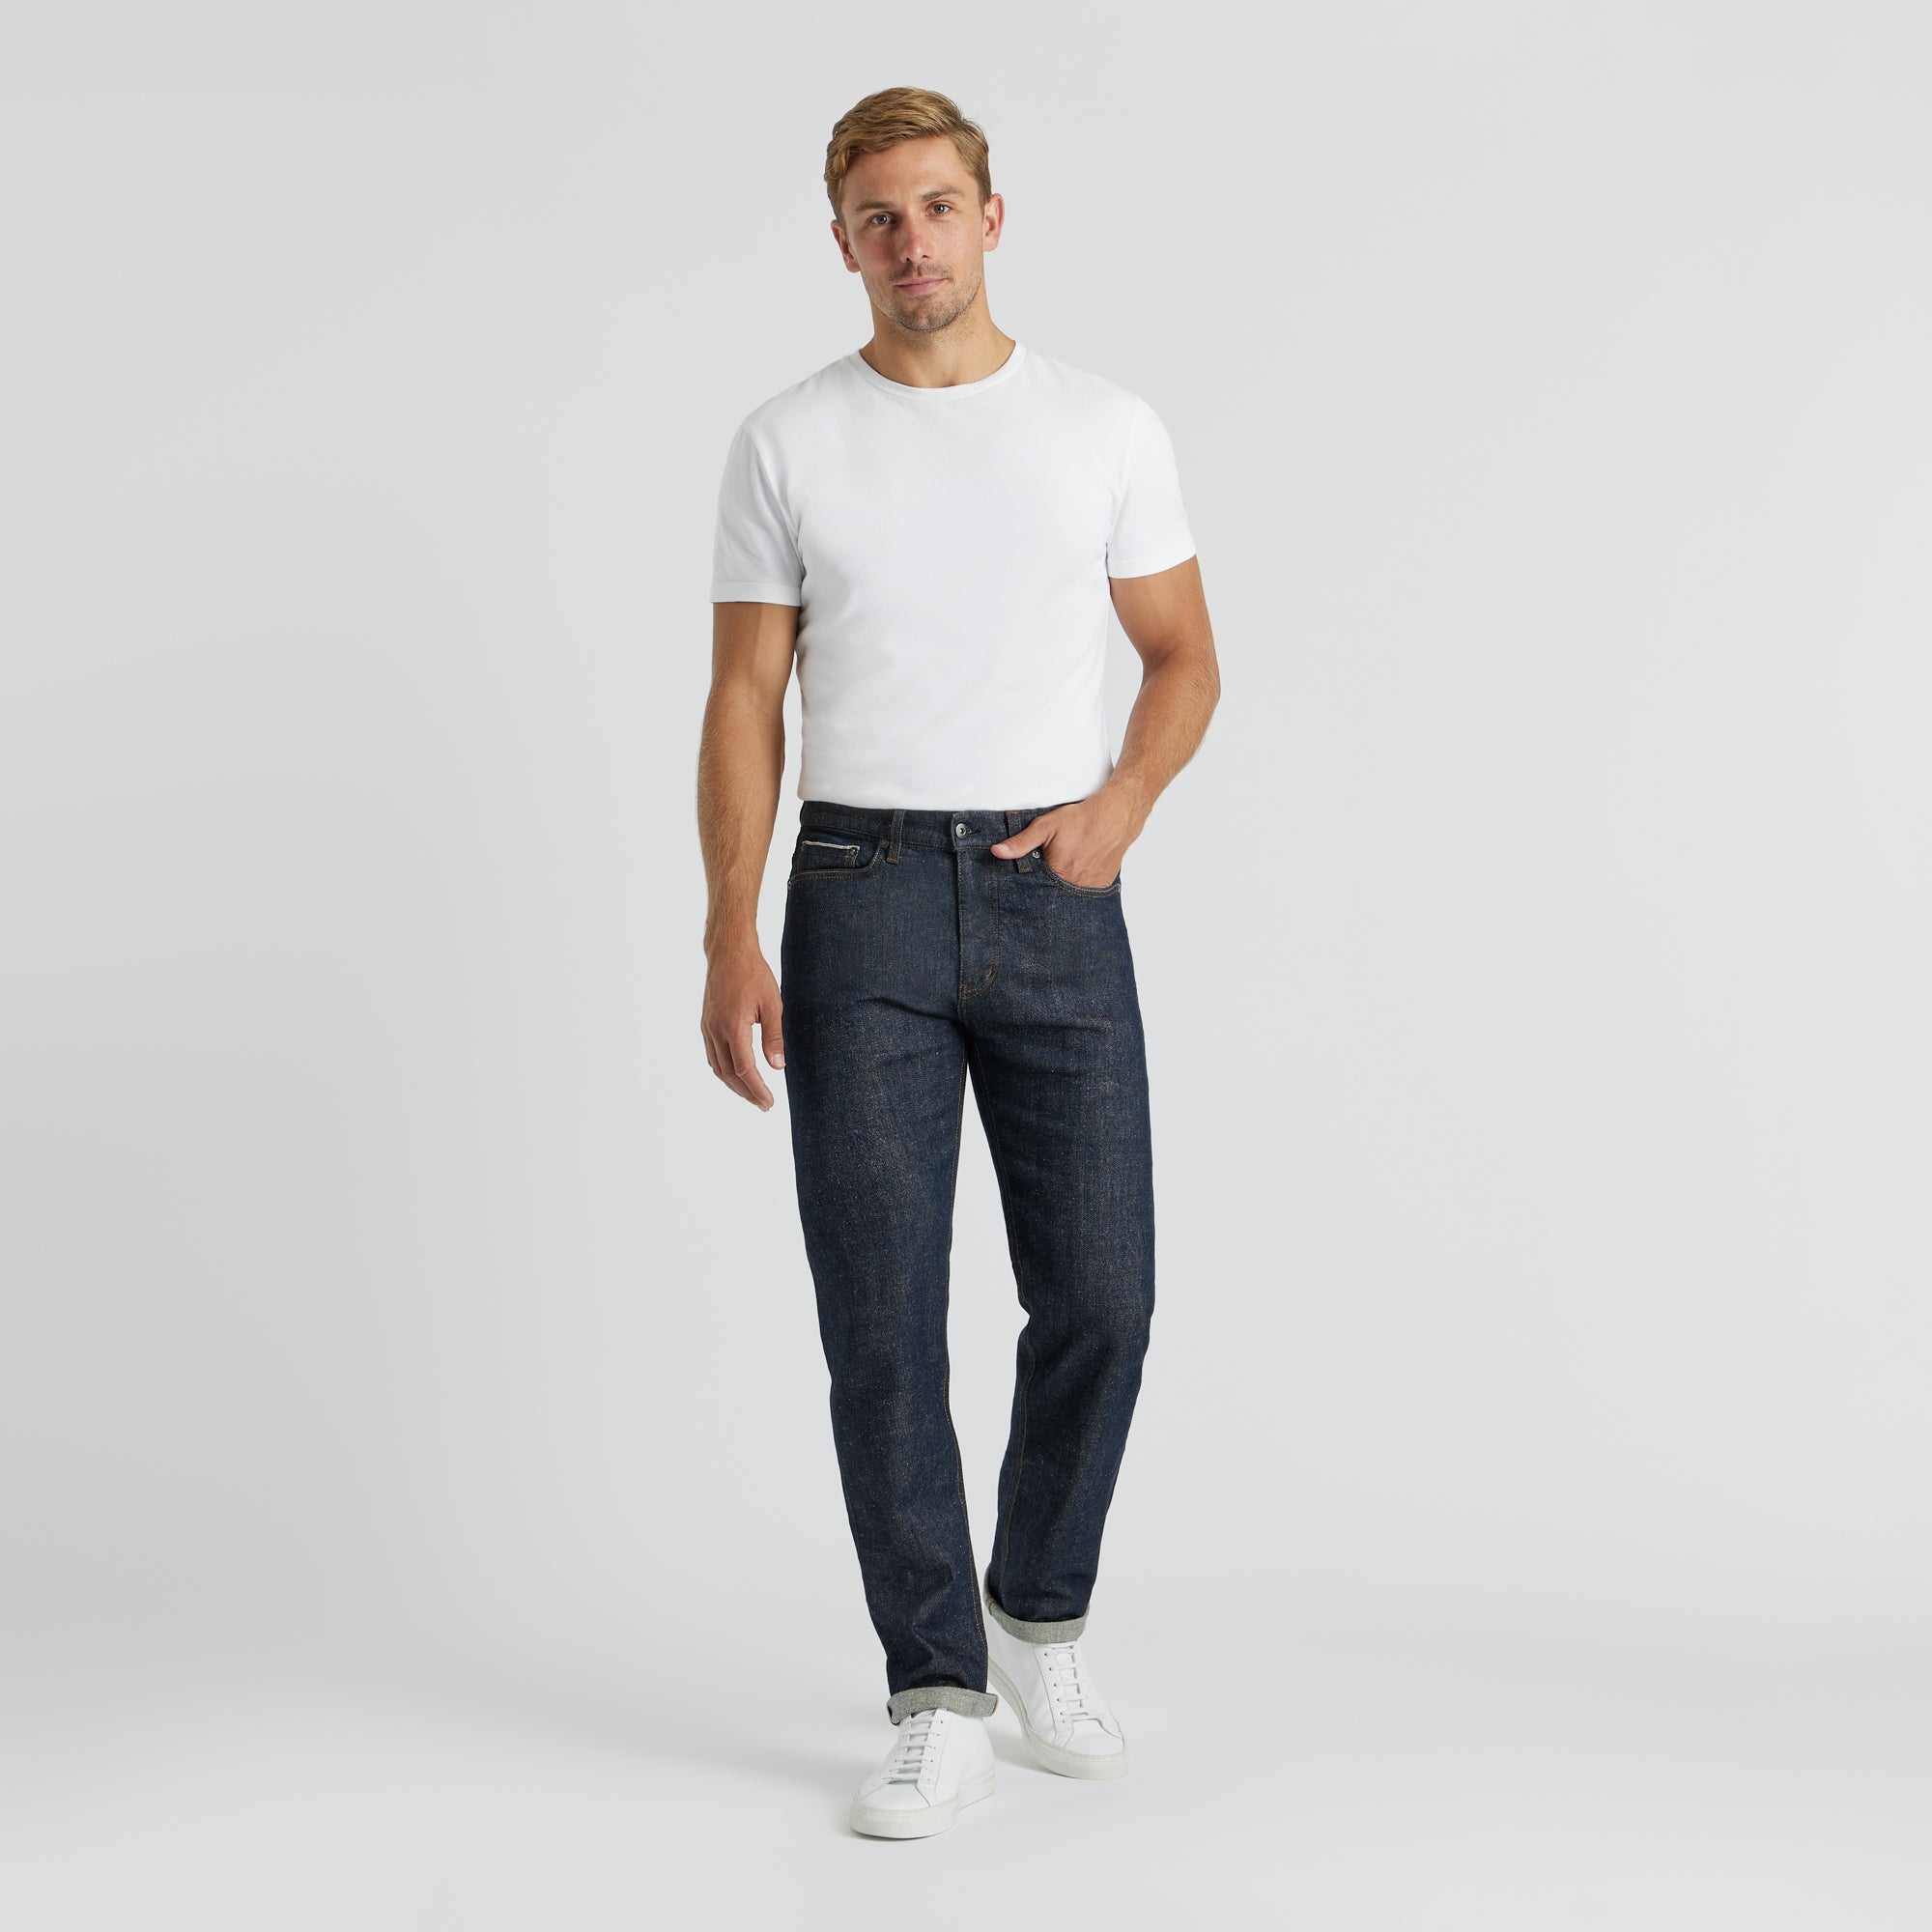 Relaxed Fit Selvedge Jean in Darned Patch Wash